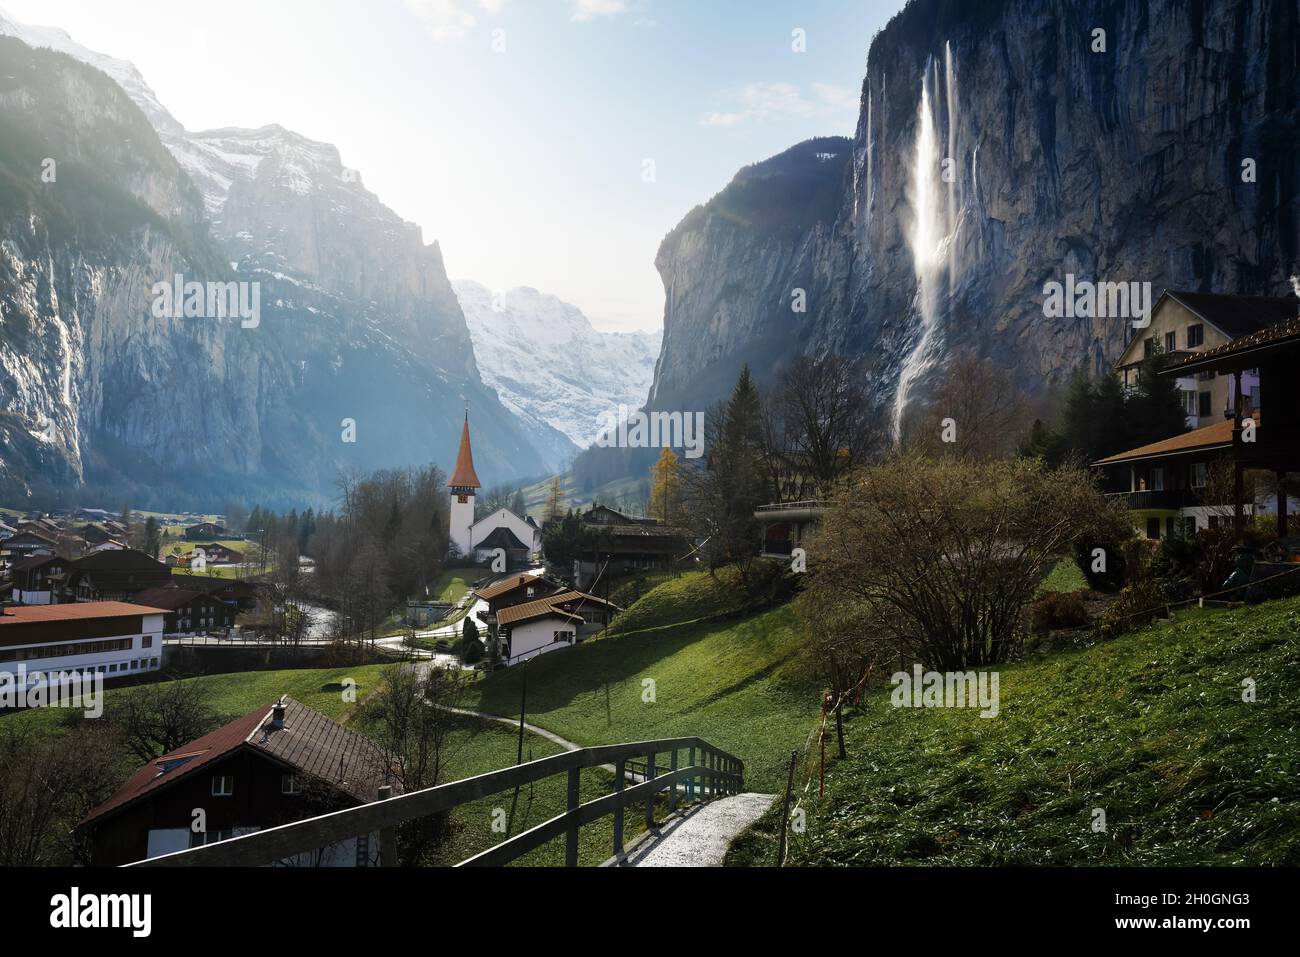 Village Church of Lauterbrunnen valley - famous Waterfall valley in the middle of the alps - Lauterbrunnen, Switzerland Stock Photo